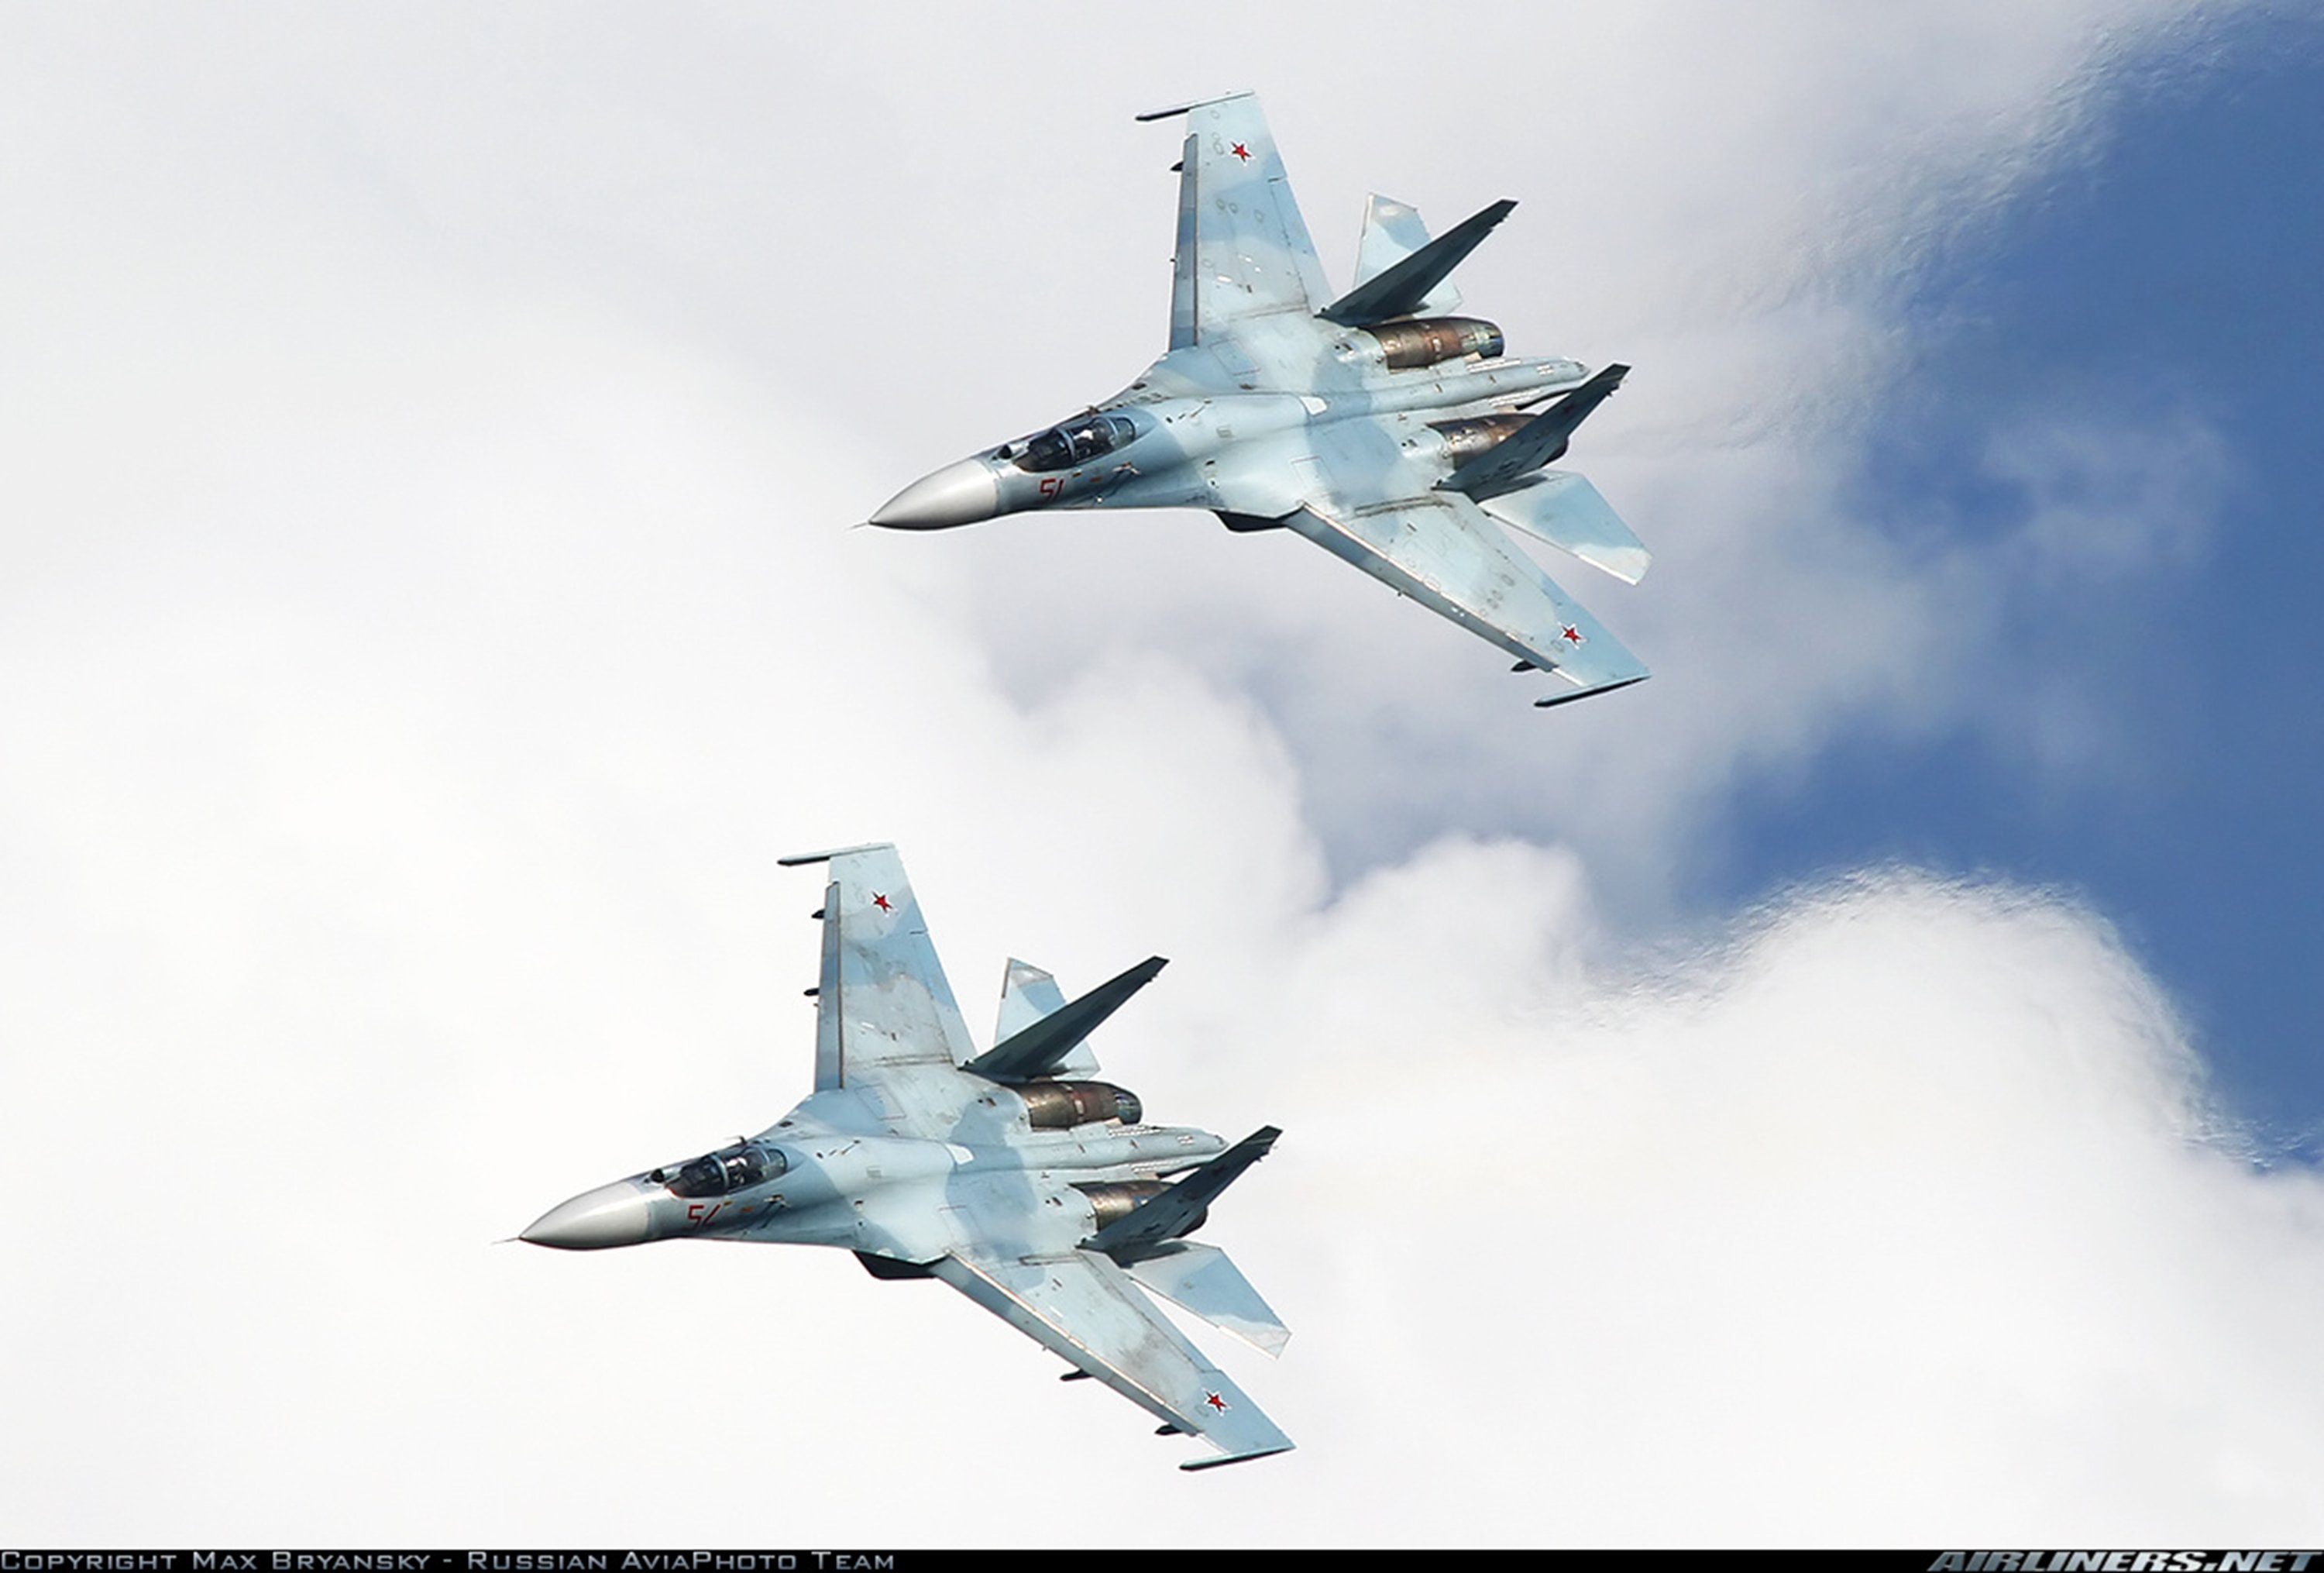 russia, Air, Force, Jet, Fighter, Sukhoi, Su 27sm3, 3000x2030 Wallpaper